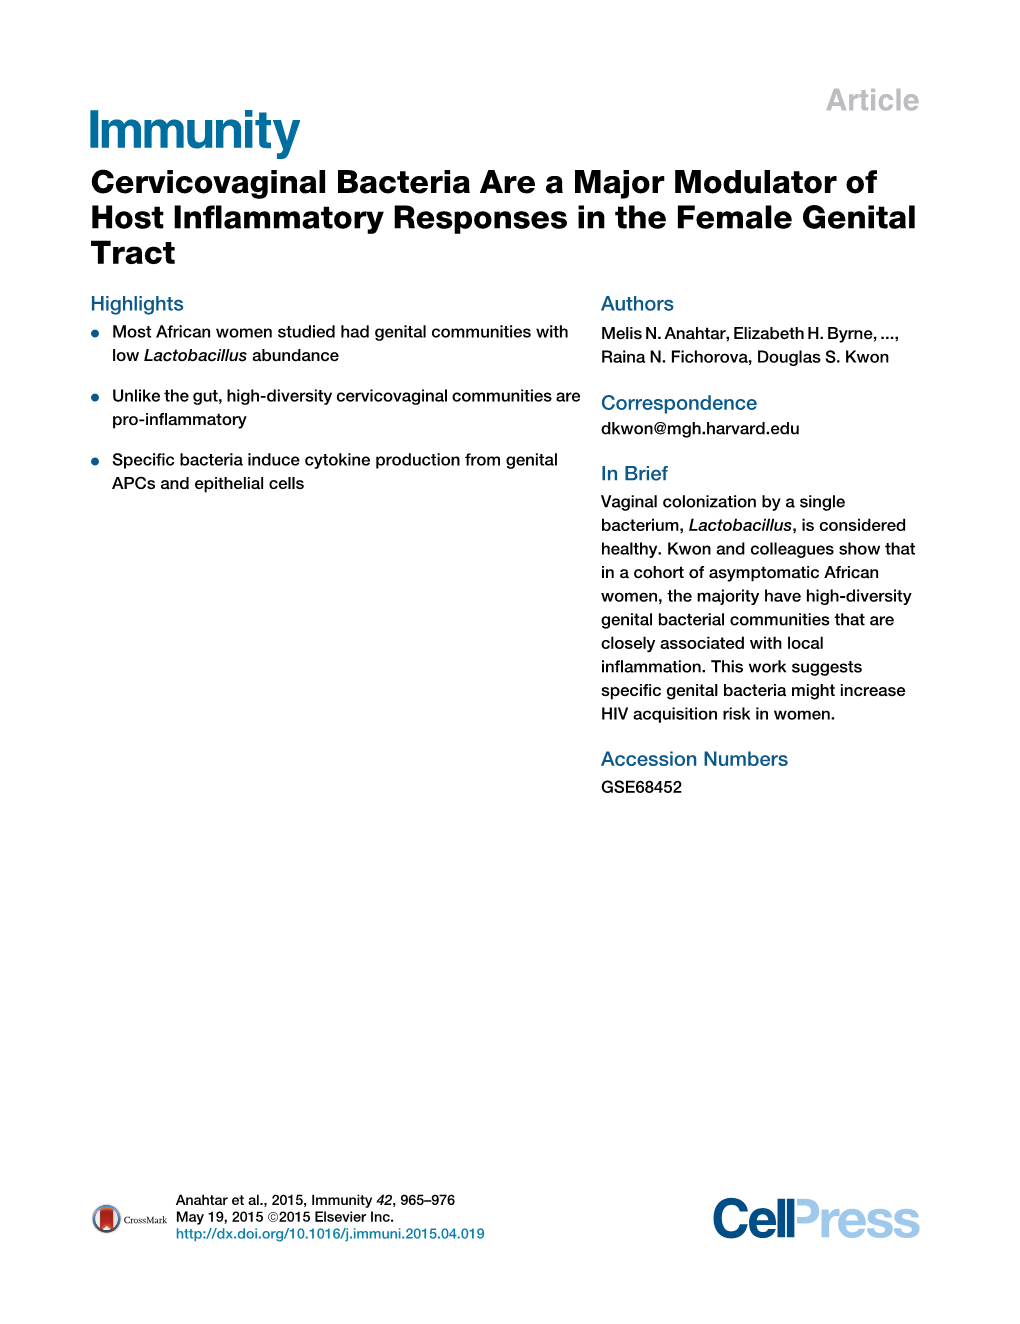 Cervicovaginal Bacteria Are a Major Modulator of Host Inflammatory